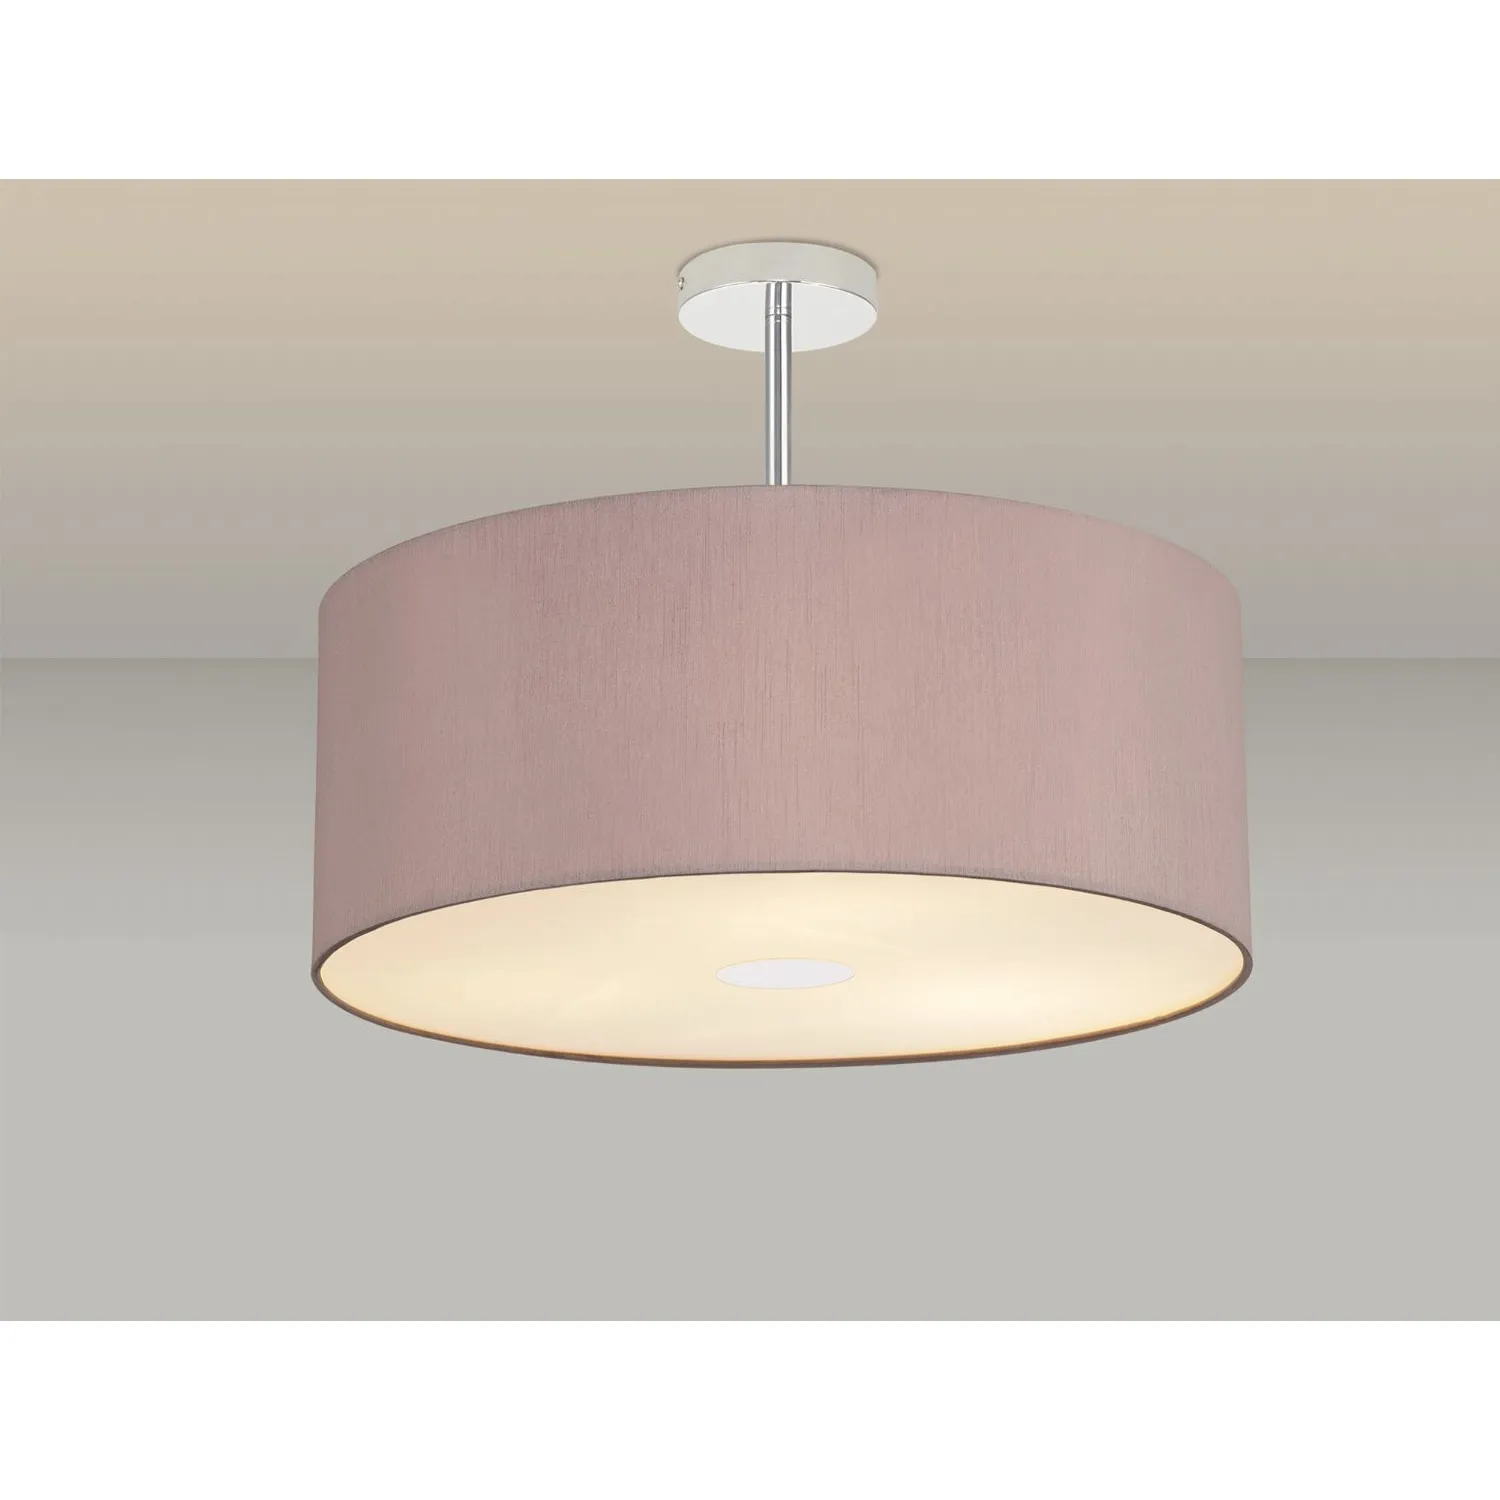 Baymont Polished Chrome 3 Light E27 Semi Flush c w 500 Dual Faux Silk Fabric Shade, Taupe Halo Gold And 500mm Frosted PC Acrylic Diffuser